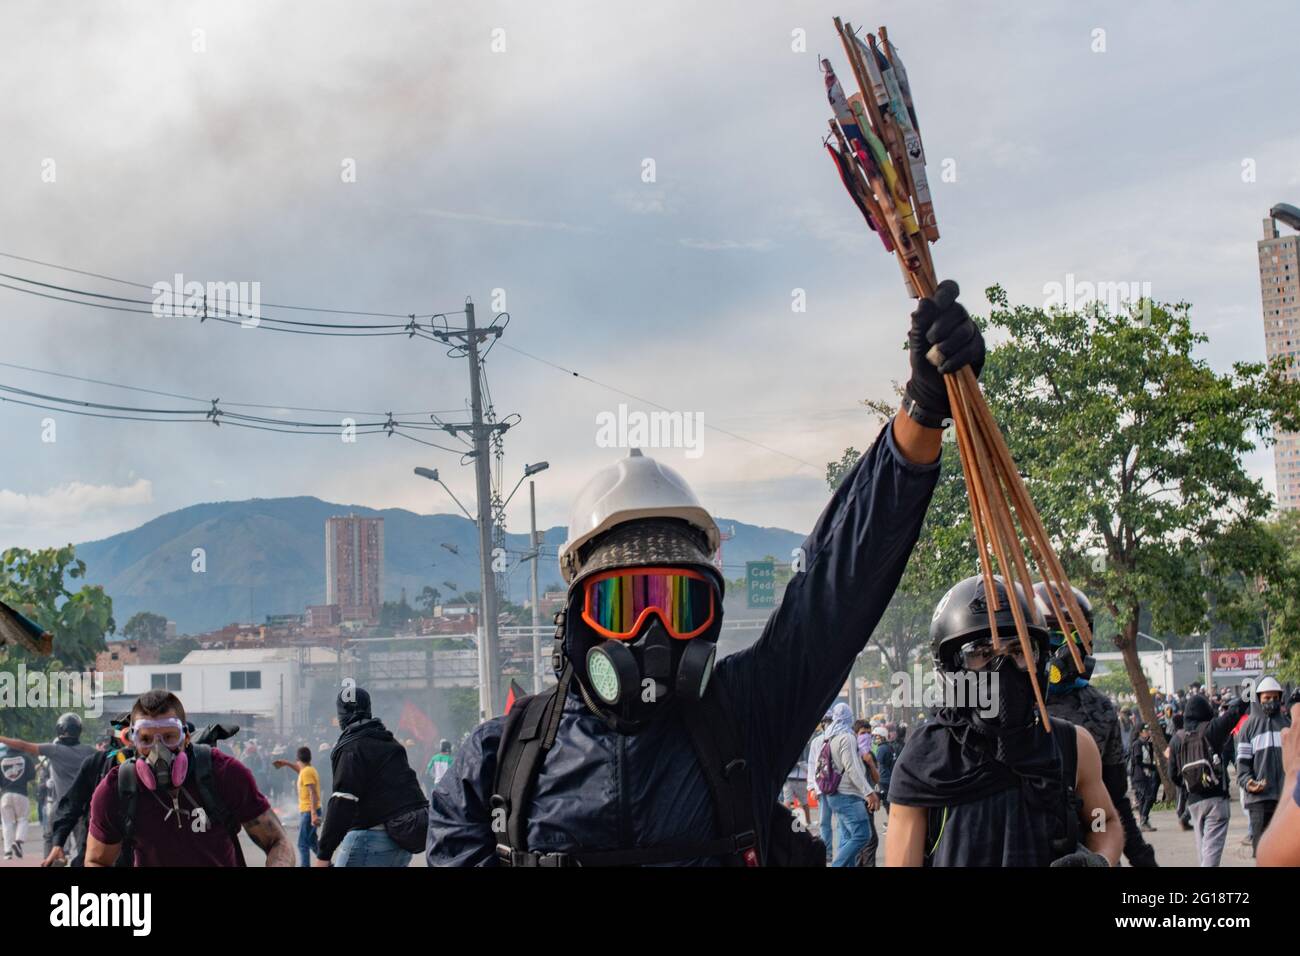 A demonstrator from the front line lifts firework crackers as clashes between demonstrators and Colombia's riot police (ESMAD) erupt in Medellín, Colombia after several weeks of anti-government protest against President Ivan Duque's tax and health reforms and unrest and abuse of authority cases that leave at least 70 dead according to NGOs on June 4, 2021. Stock Photo